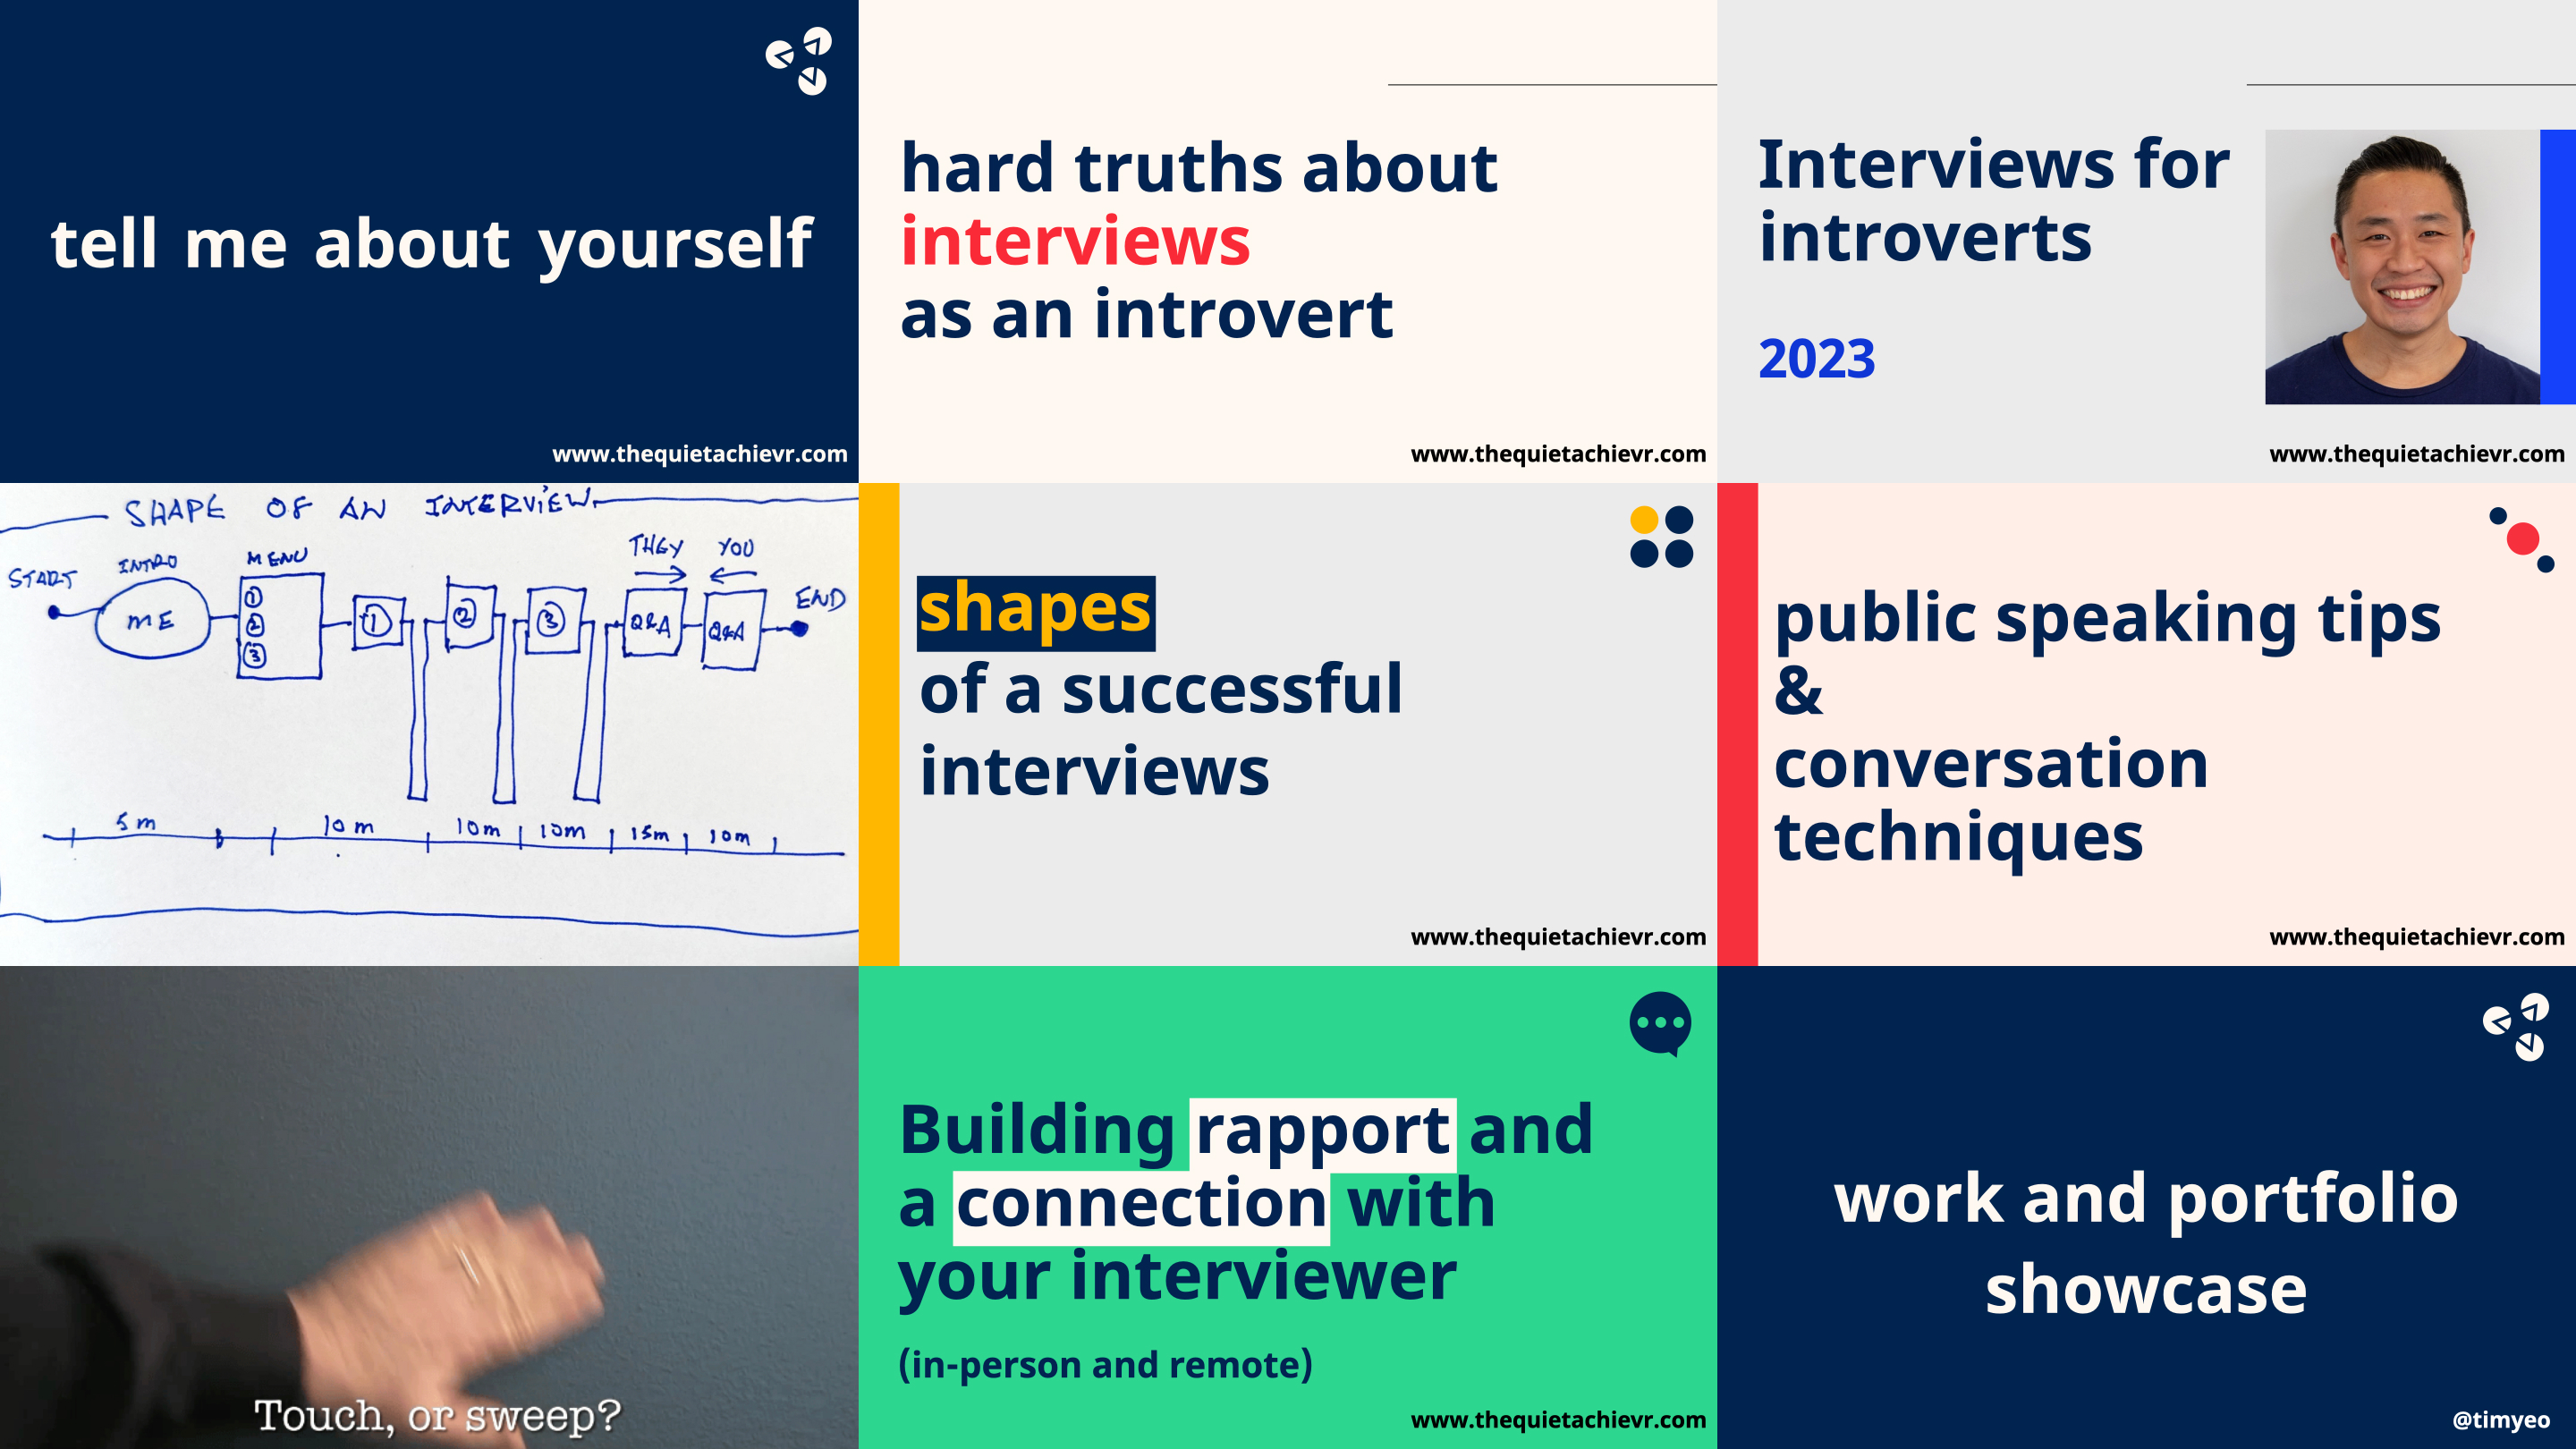 Interviews for introverts